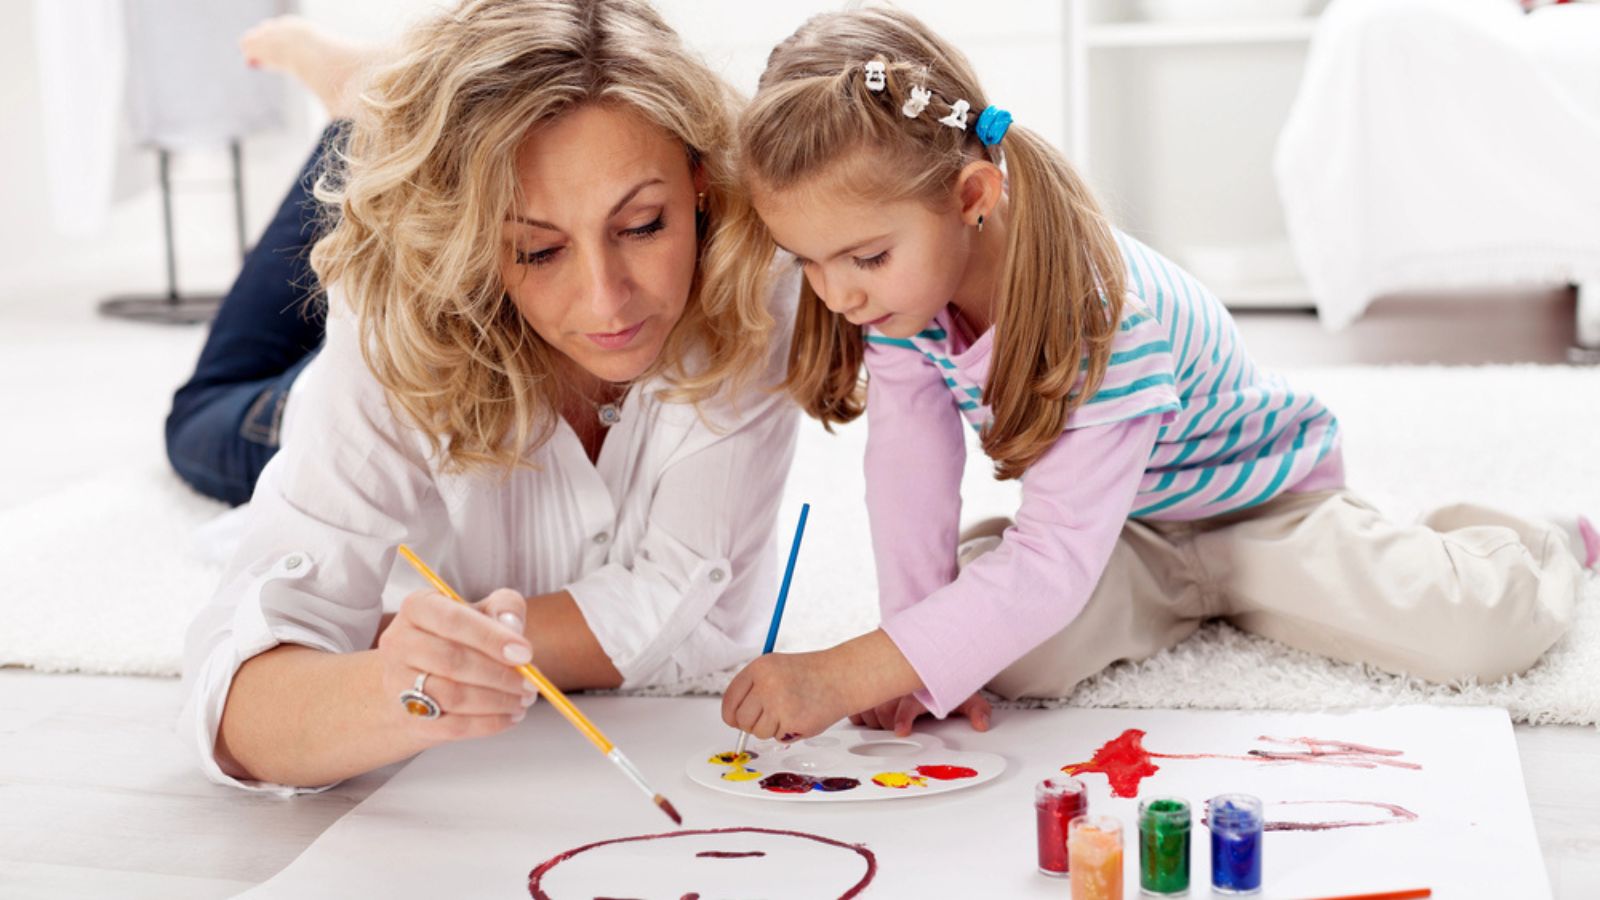 Little girl painting with her mother.jpg